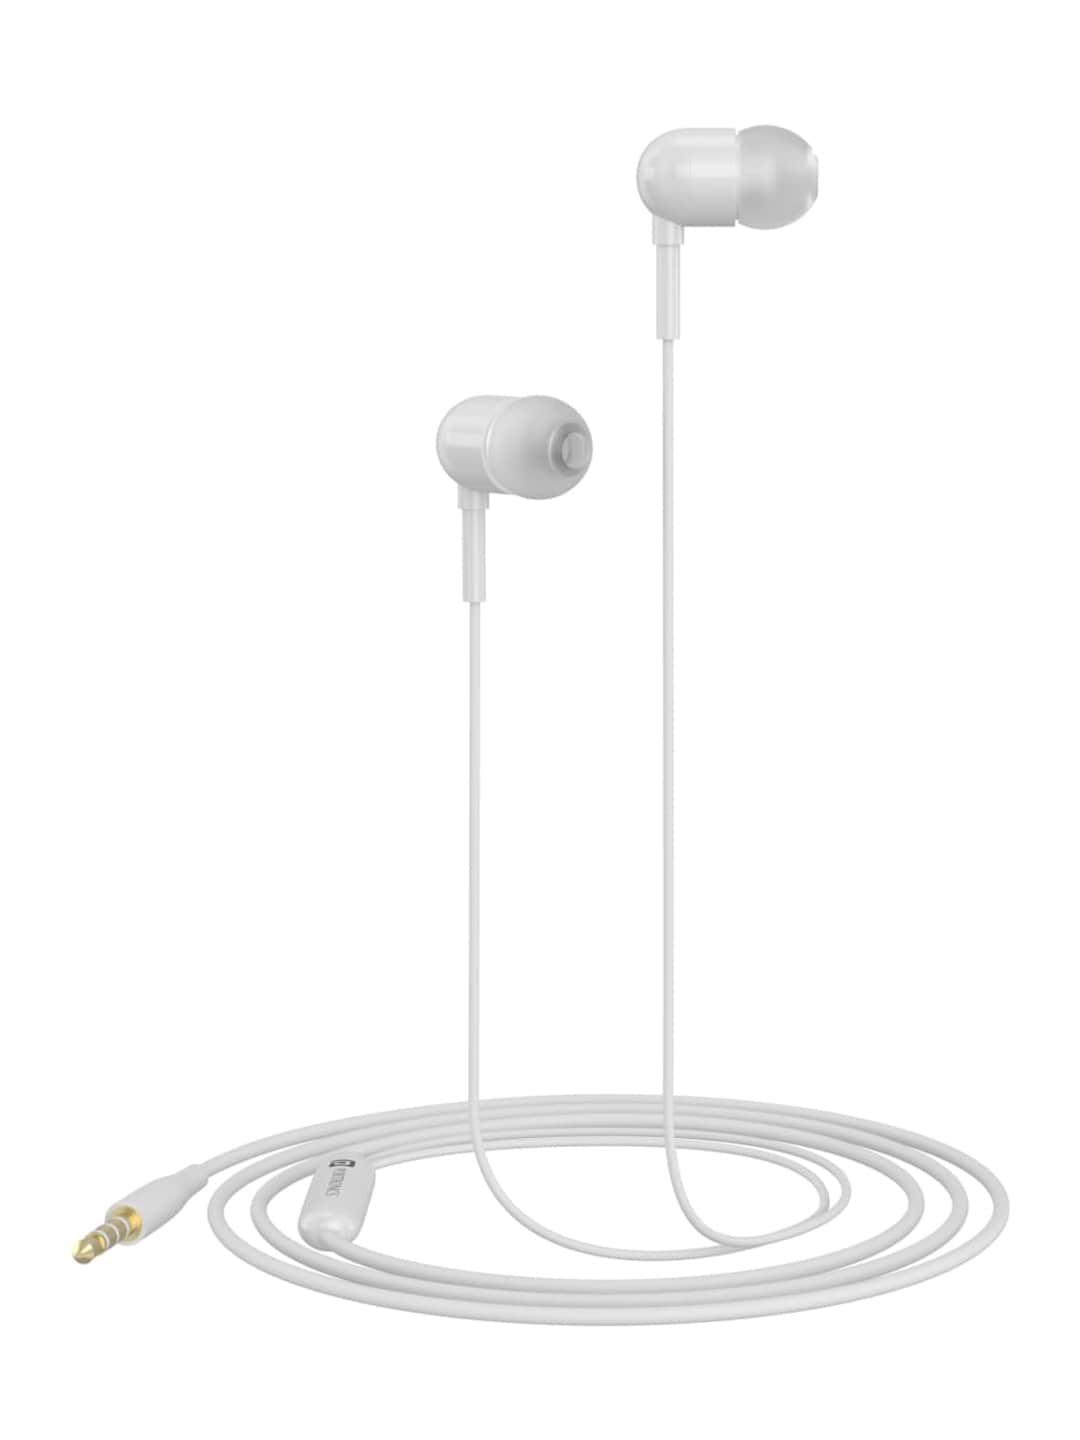 Portronics White Solid Conch 50 In-Ear Wired Earphone Price in India